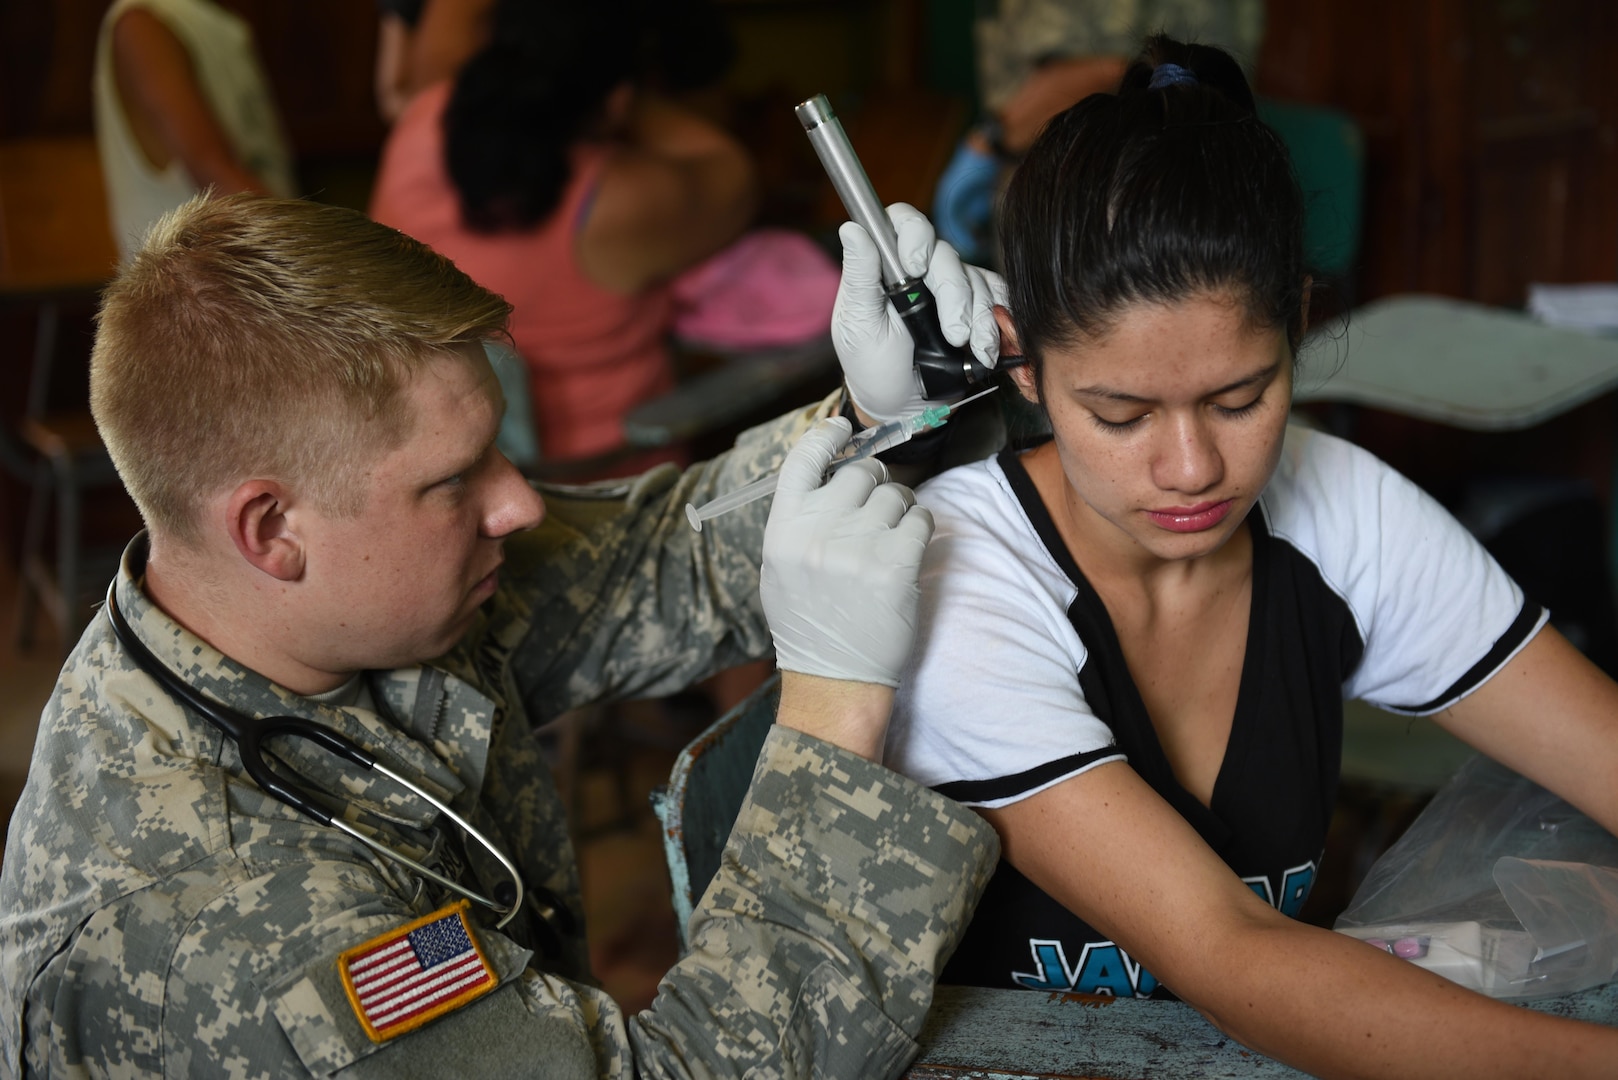 U.S. Army Spc. Timothy Morrison, Joint Task Force-Bravo Medical Element, performs an ear irrigation on a young girl during a Medical Readiness Training Exercise in Corinto, Cortes, Feb. 17, 2017. MEDRETEs provide a real world environment where servicemembers can hone their medical skills under austere conditions better preparing them for challenging situations. (U.S. Army photo by Maria Pinel)